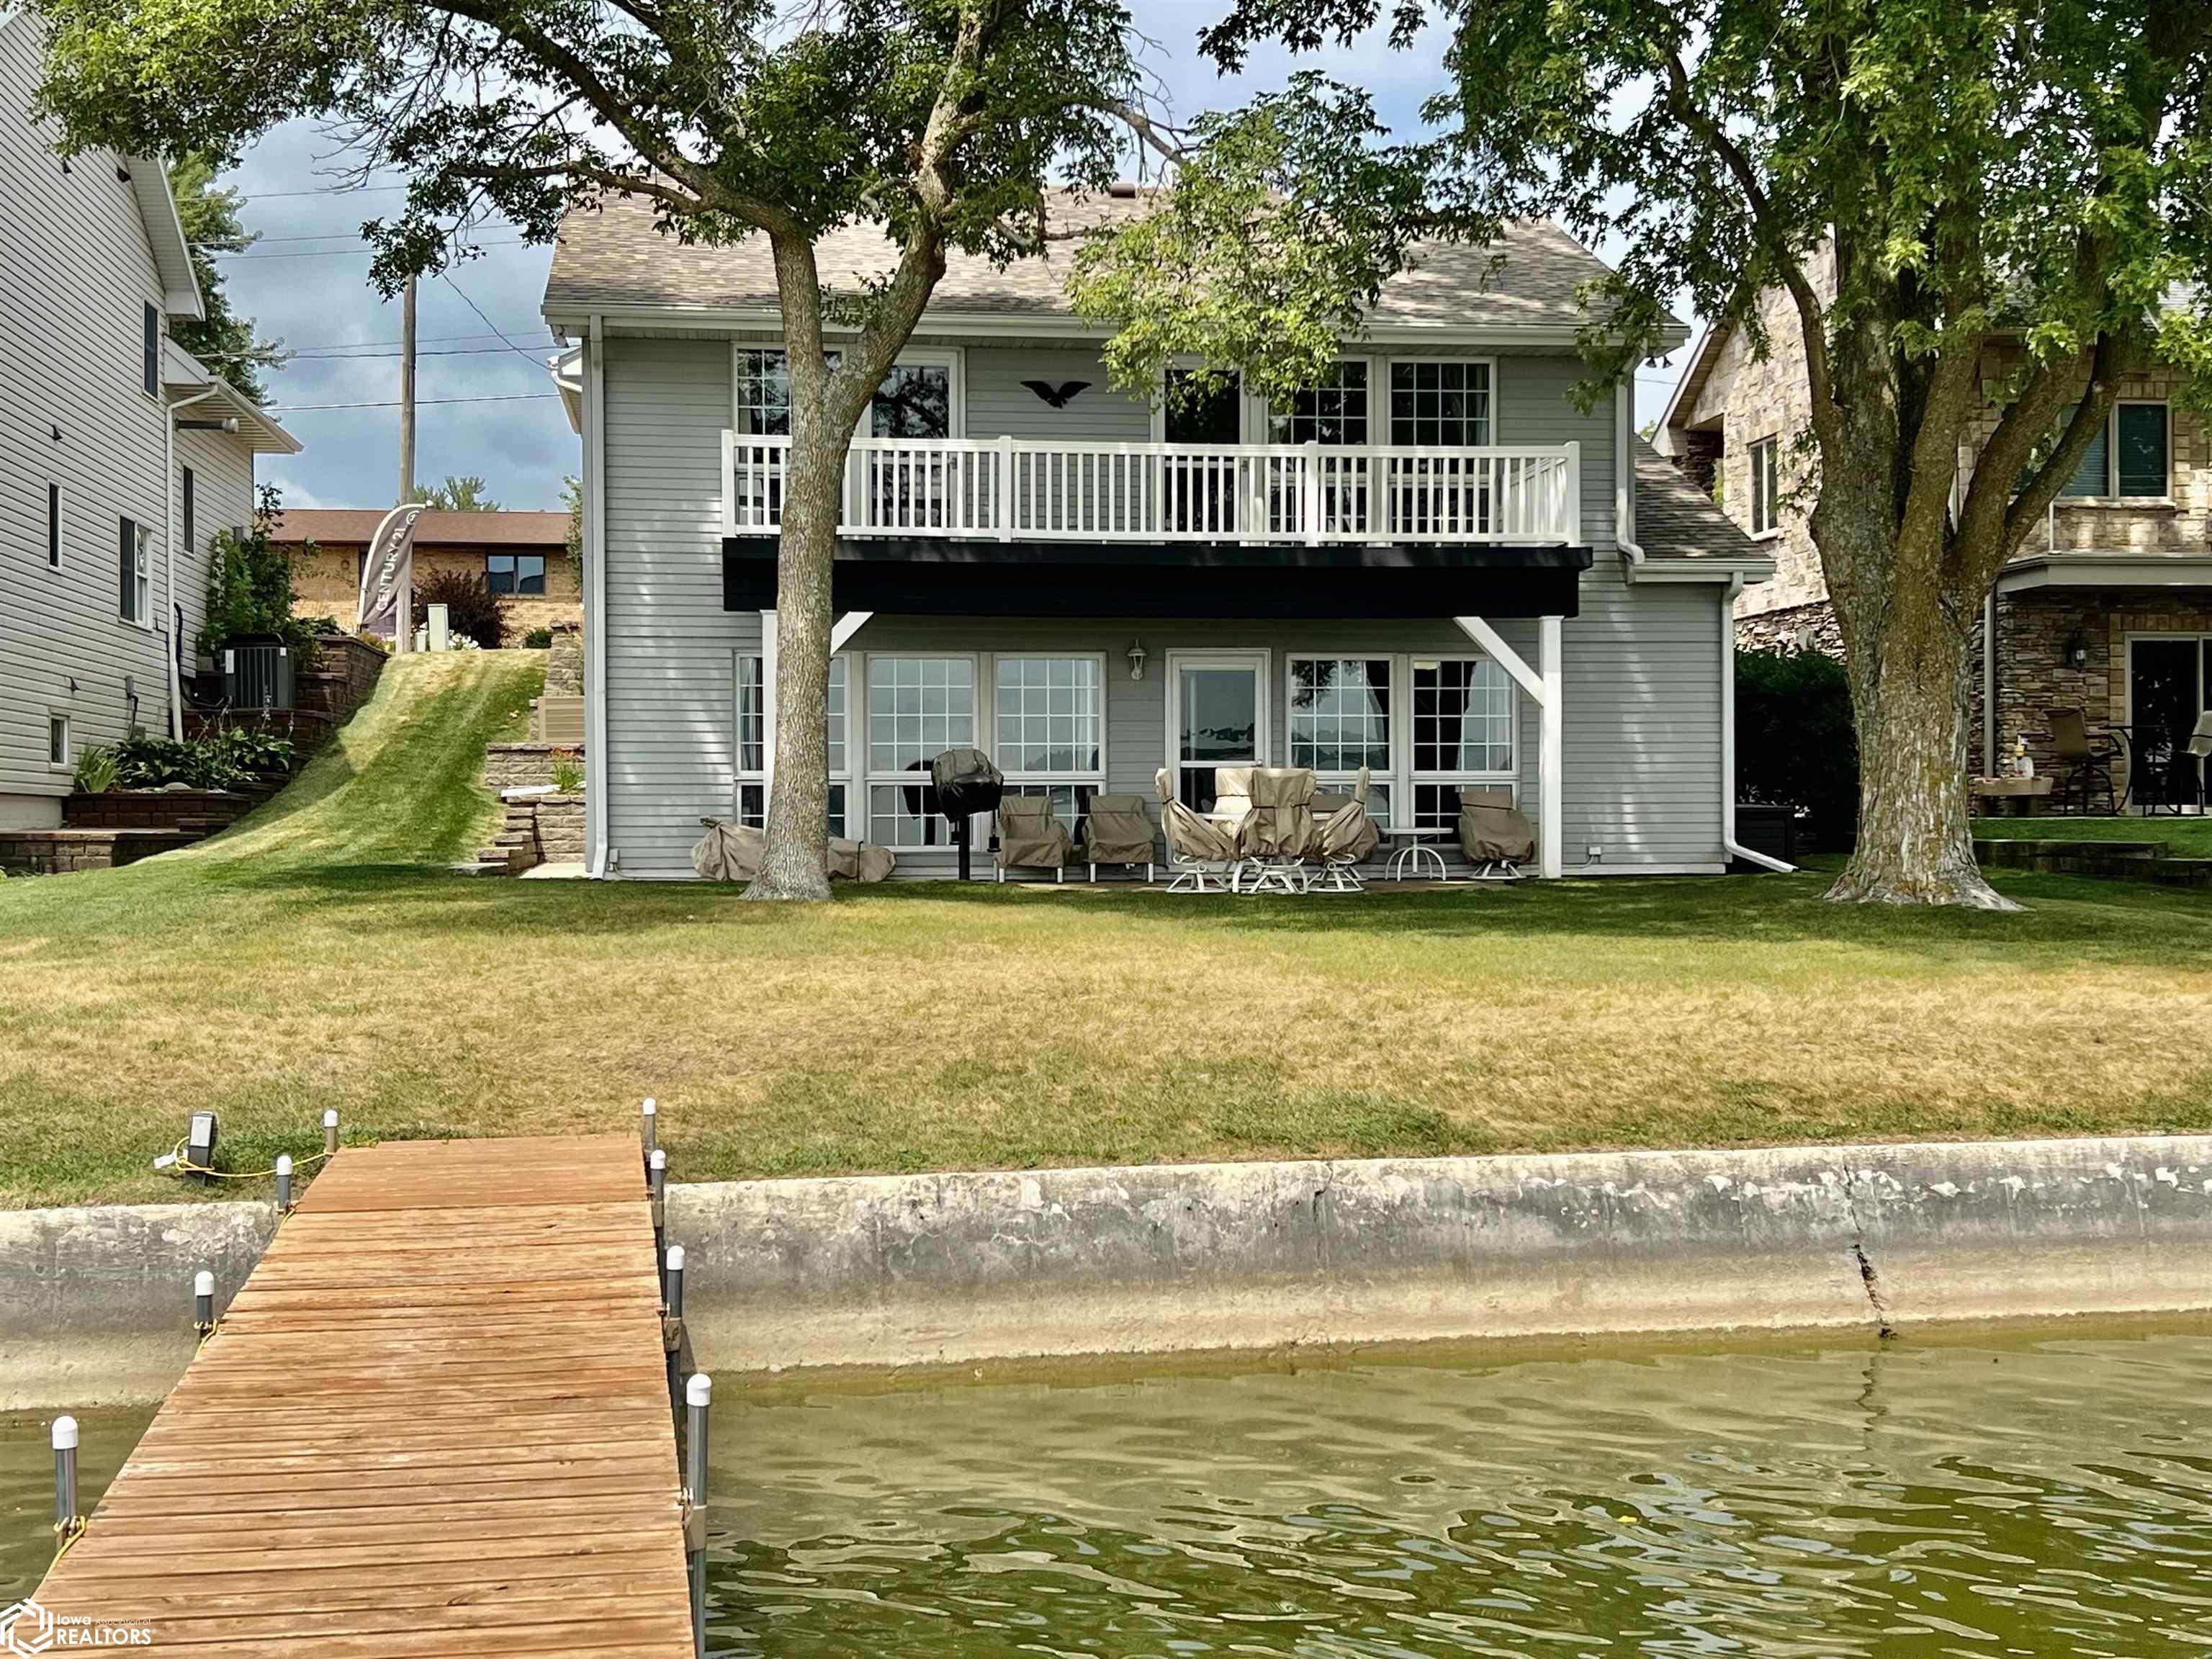 First time on the market! 60' OF LAKESHORE!! The opportunities are endless when it comes to this well built, well maintained lakeshore home! Enjoy all the amenities with entry level dock access, gorgeous lakeview, and open concept living with walk out lower level. This unique home features 3 massive bedrooms, 2 bathrooms, and an oversized single garage with 5 extra off street parking spots which is a rare for North Shore! Call your Realtor today and schedule your personal showing soon!